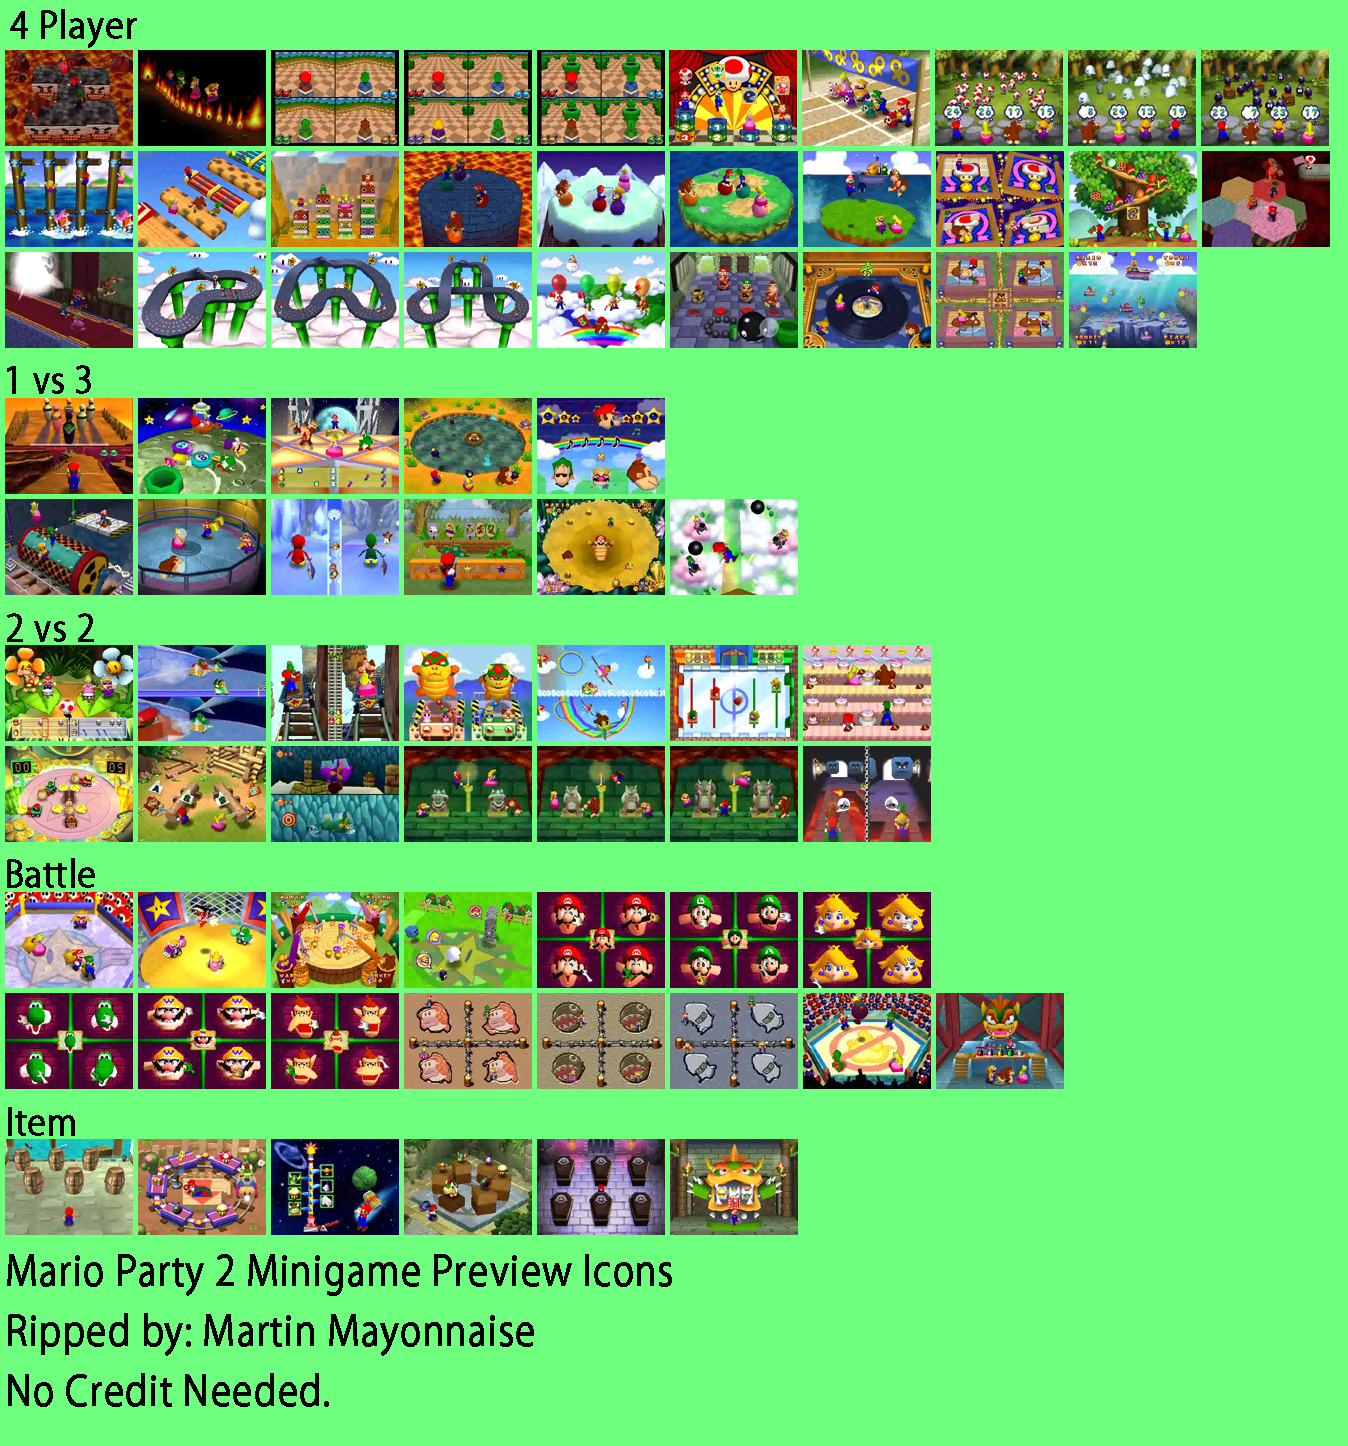 Minigame Preview Icons